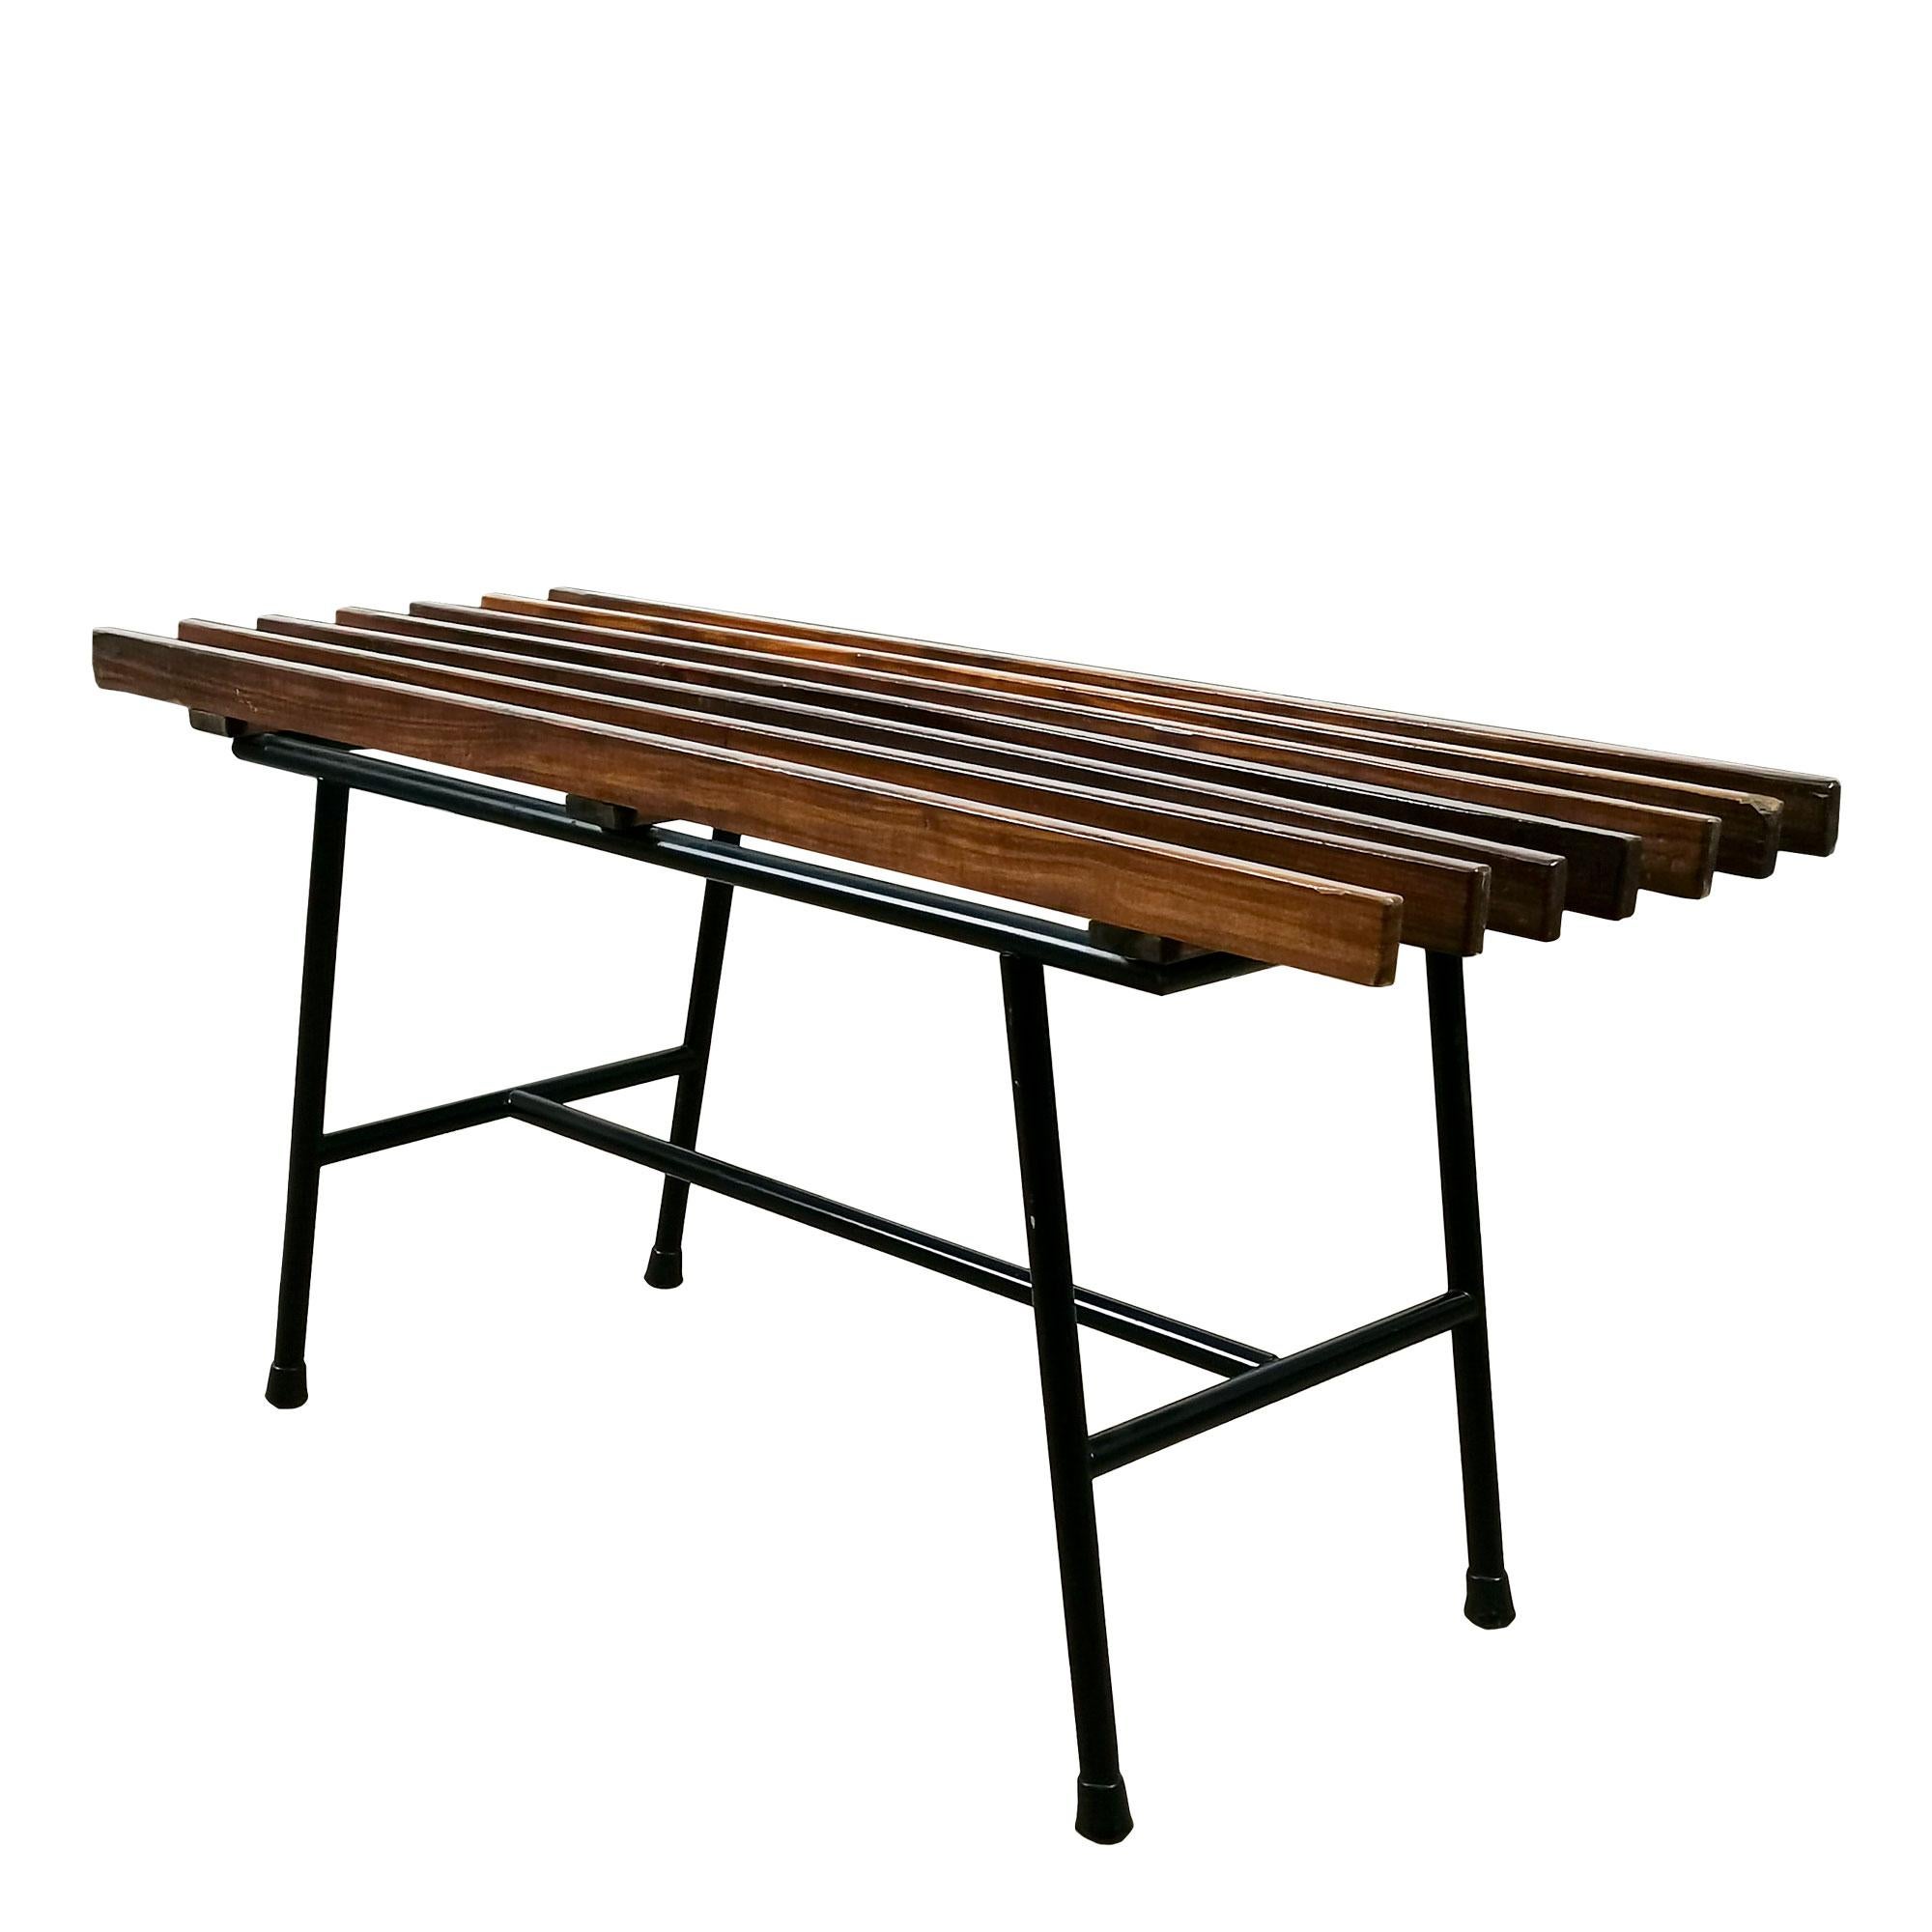 Pair of benches in solid mahogany slats which rest on a black tubular steel base ending in black plastic caps.

Italy c. 1960.

Dimensions: 

bench 1:  89 x 31 x 39 cm
bench 2: 80 x 31 x 39 cm